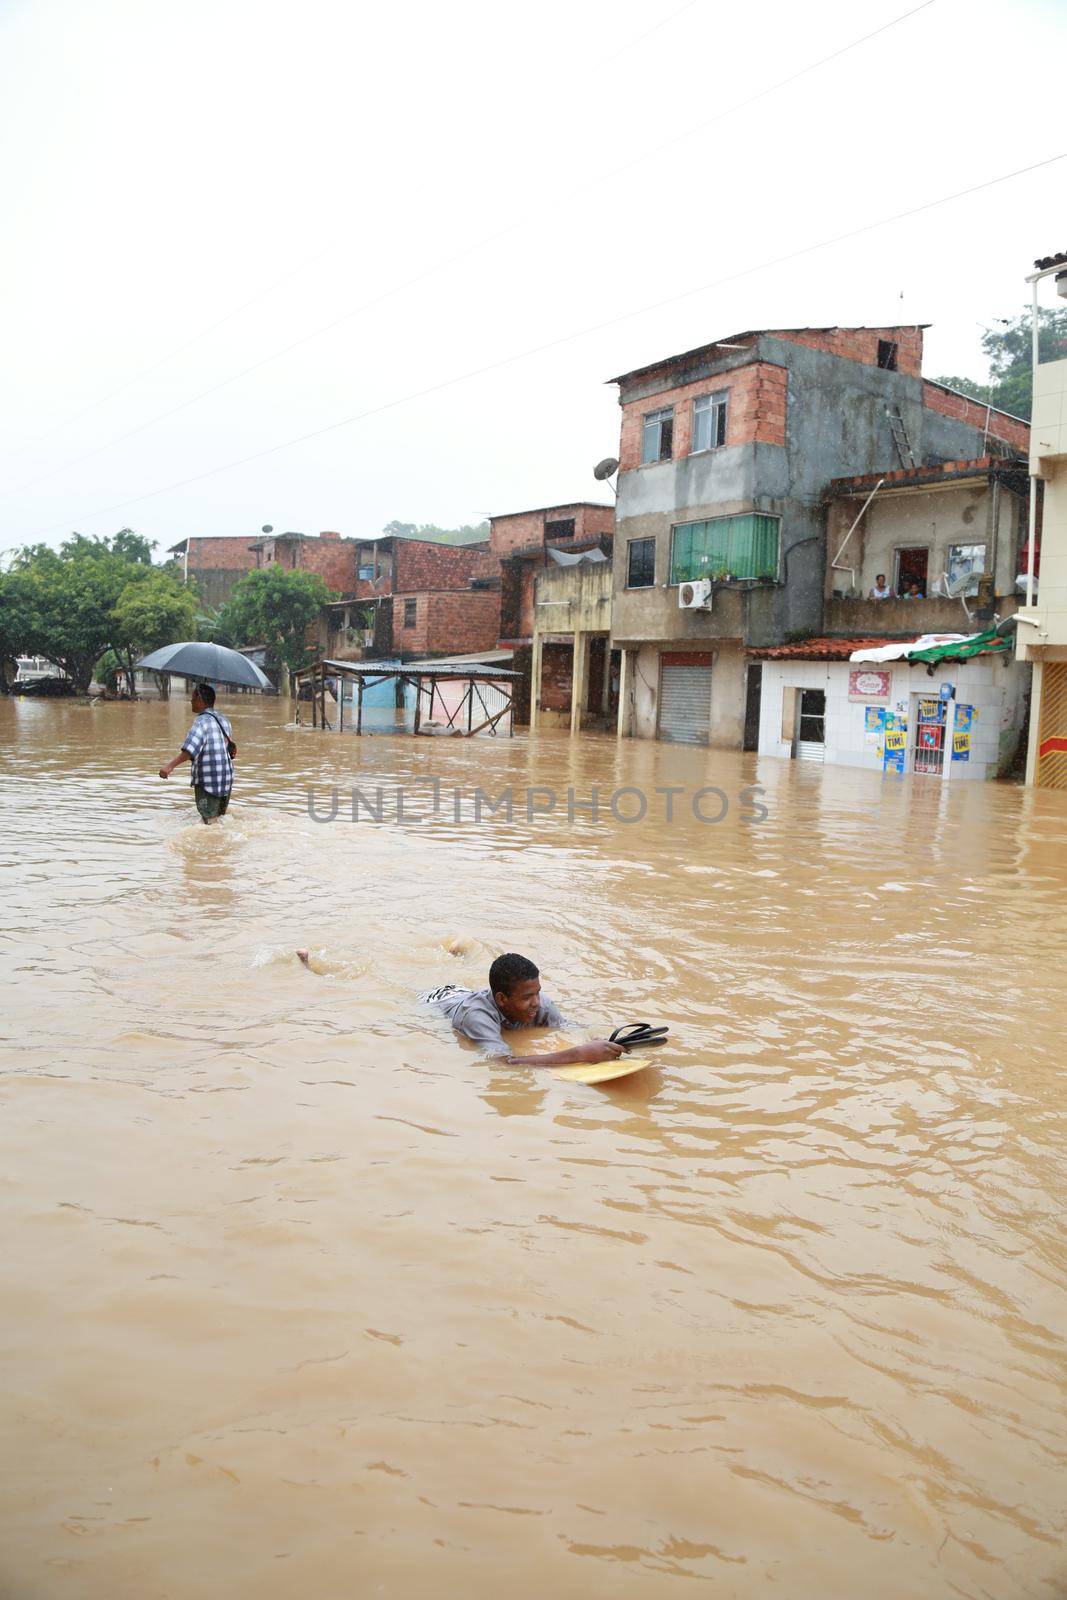 salvador, bahia / brazil - April 27, 2015: Young man is seen with surfboard in flooded area during rainy season community of Bate-faxo in the city of Salvador.